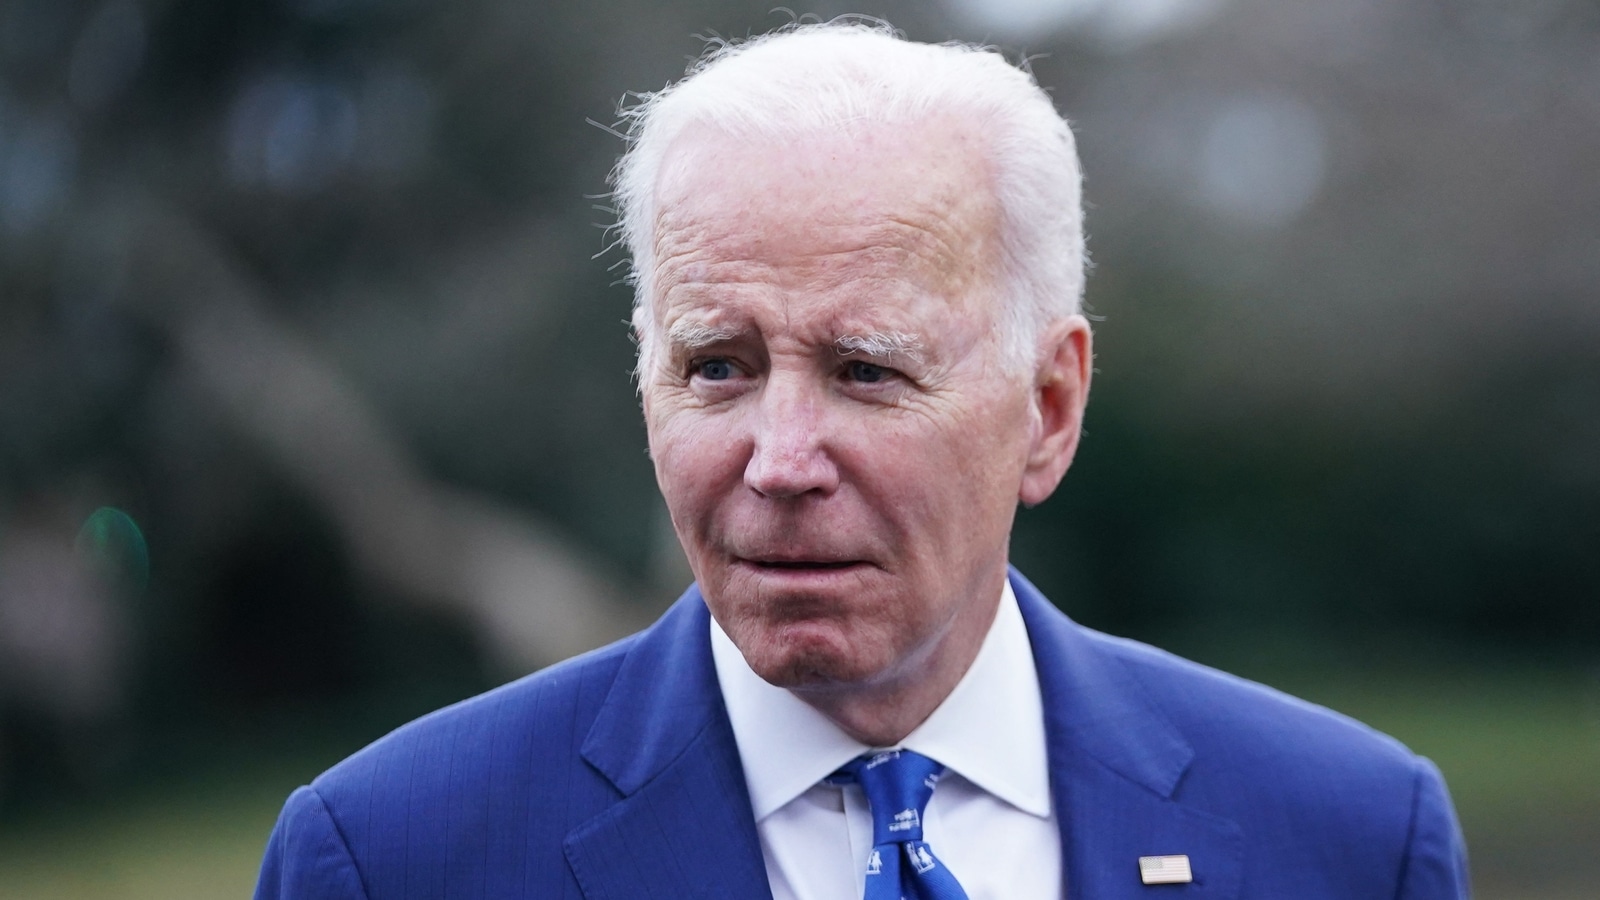 'Outraged and deeply pained': Biden over Memphis fatal police beating video